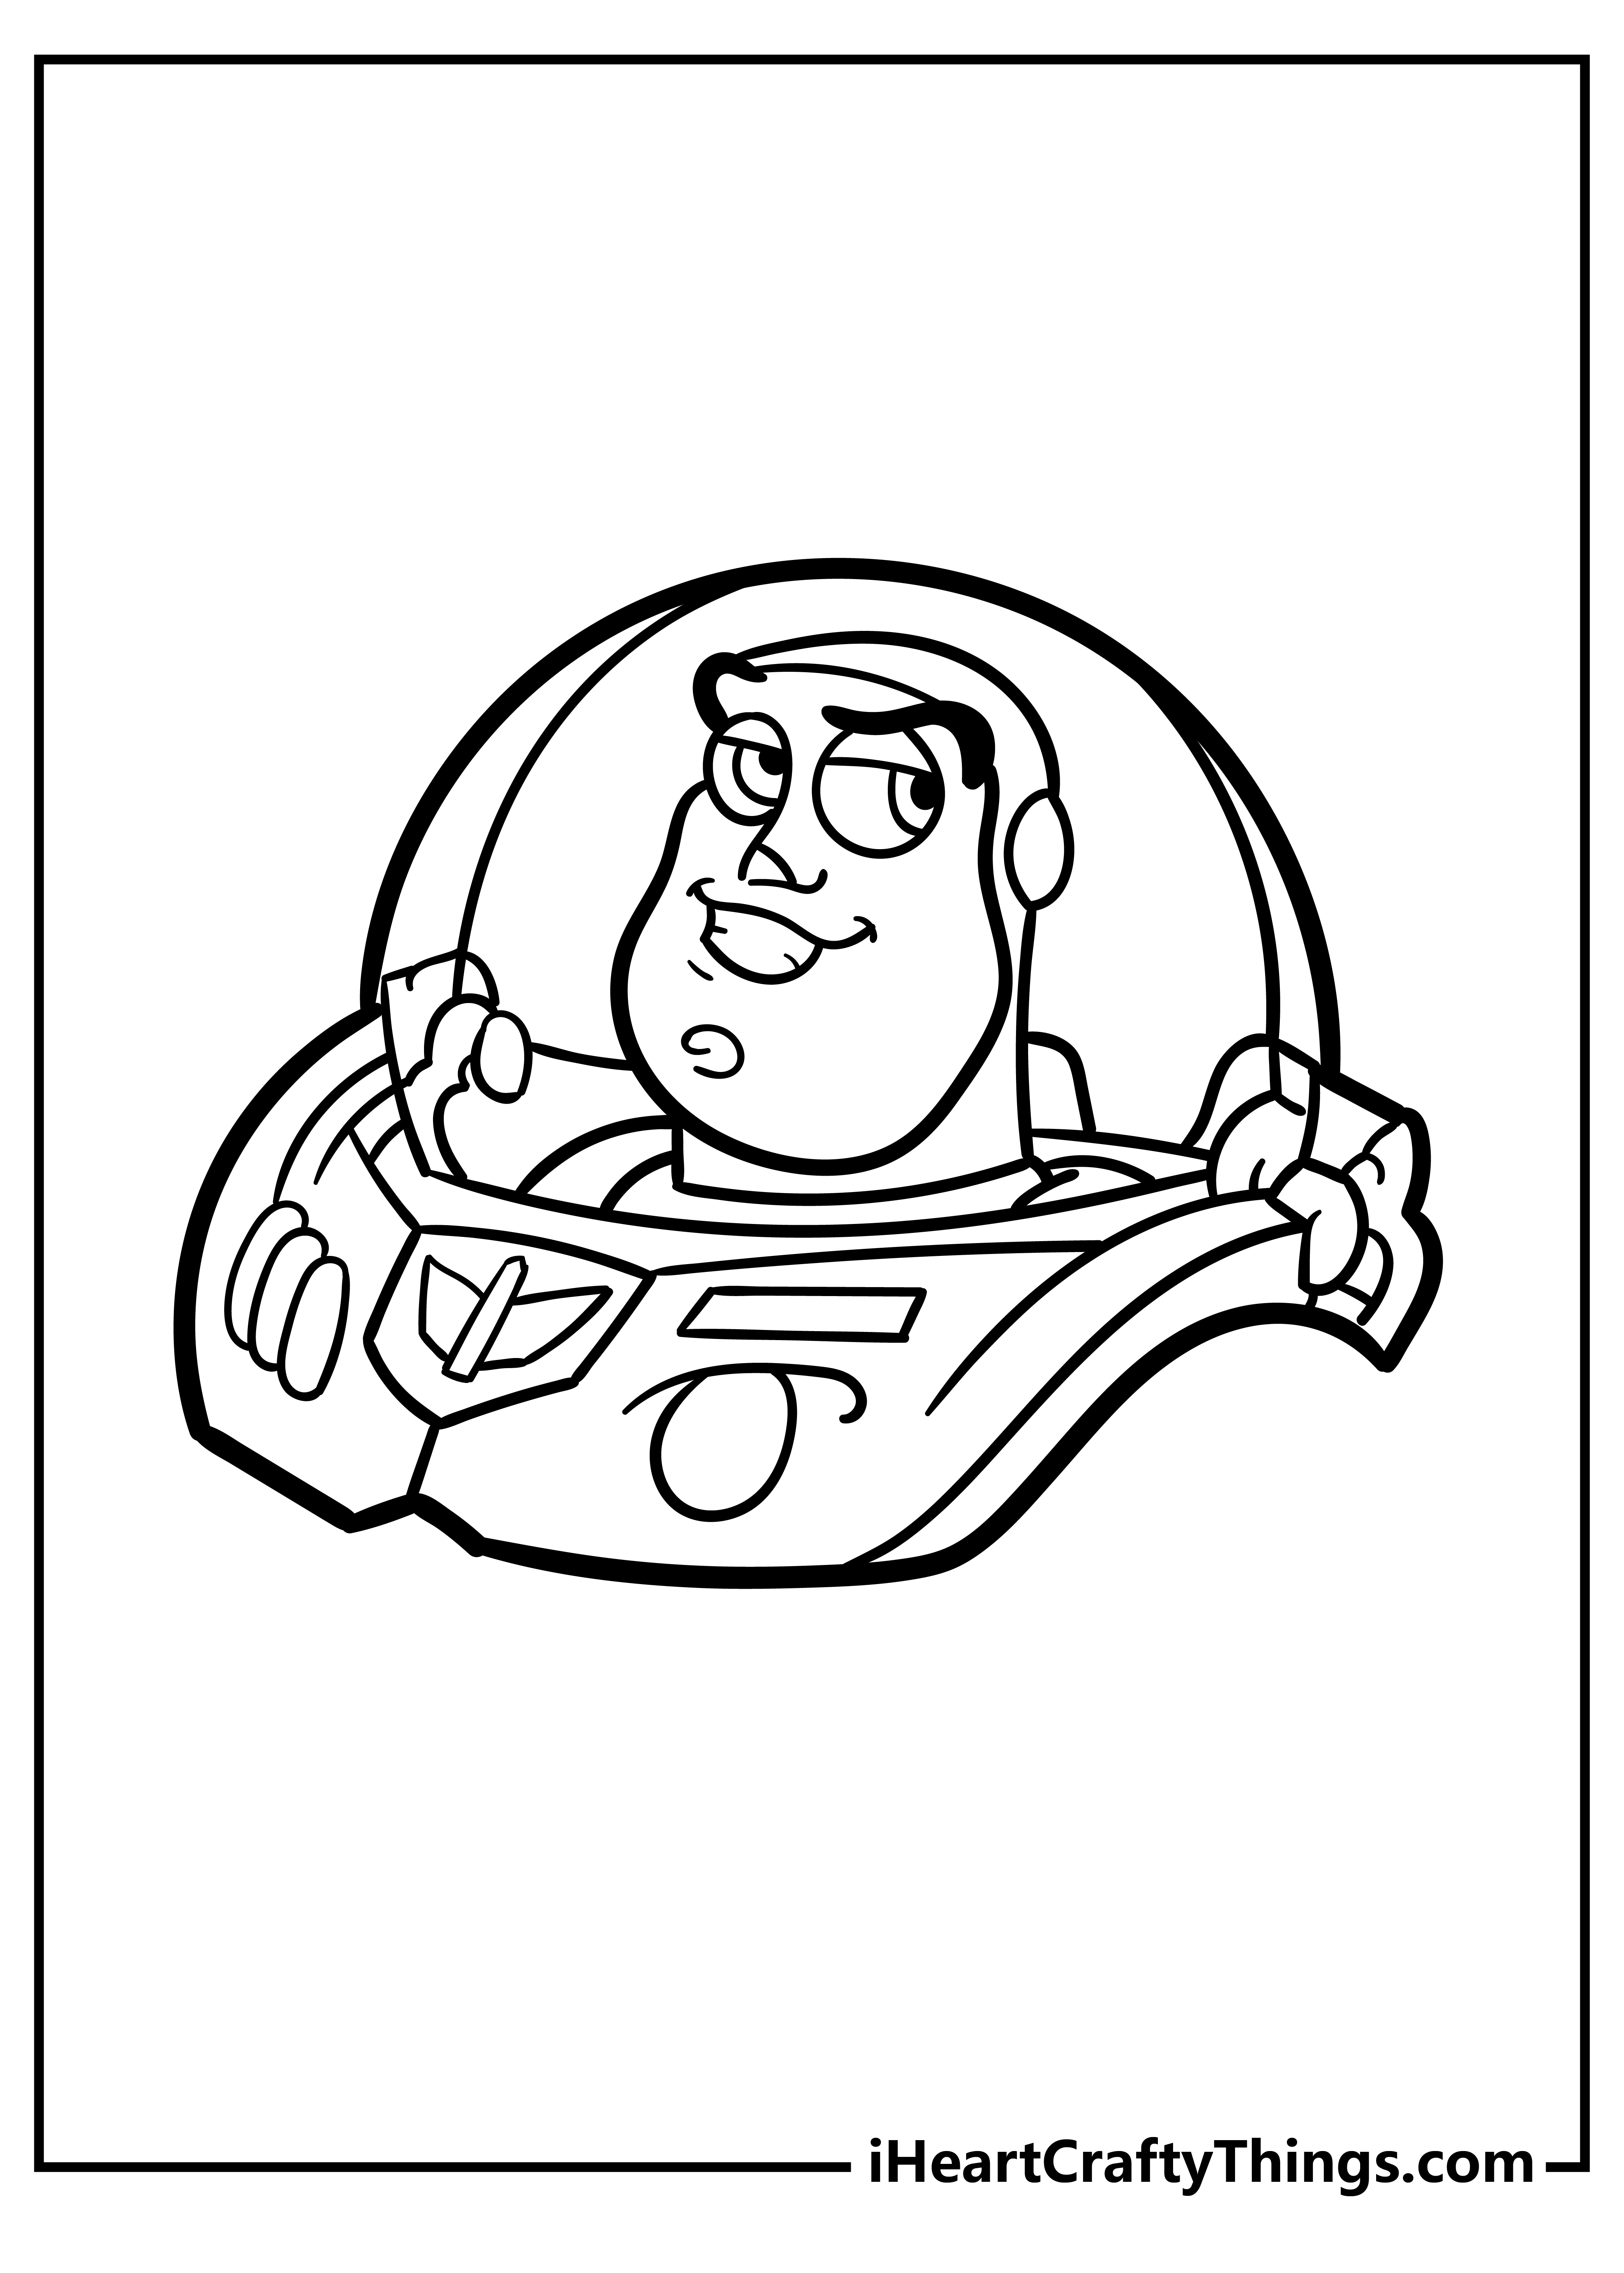 Buzz lightyear coloring pages free printables